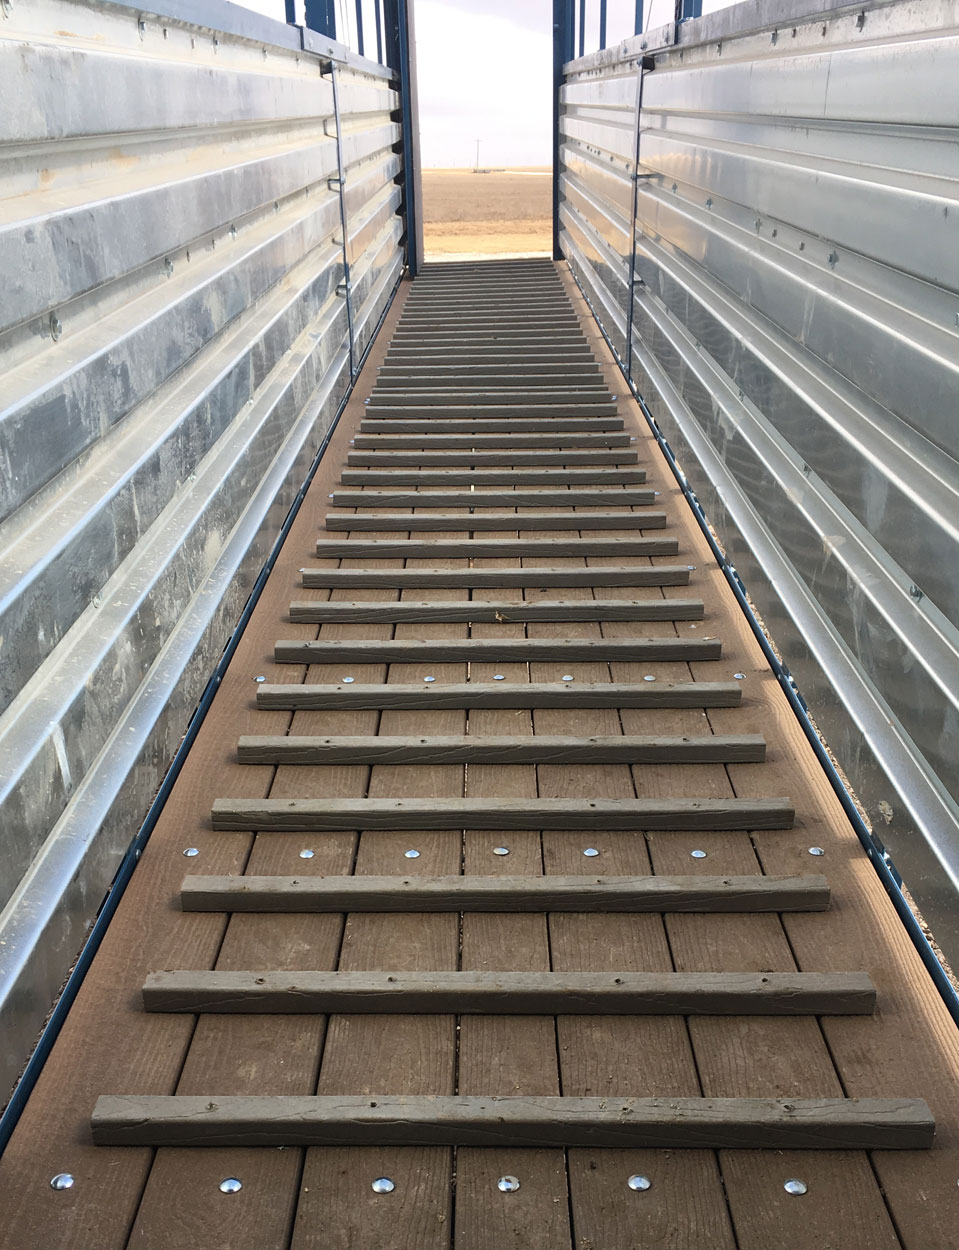 Hog Slat loading chutes feature floor pickets that provide additional traction for pigs when loading at steeper angles or during inclement weather conditions.